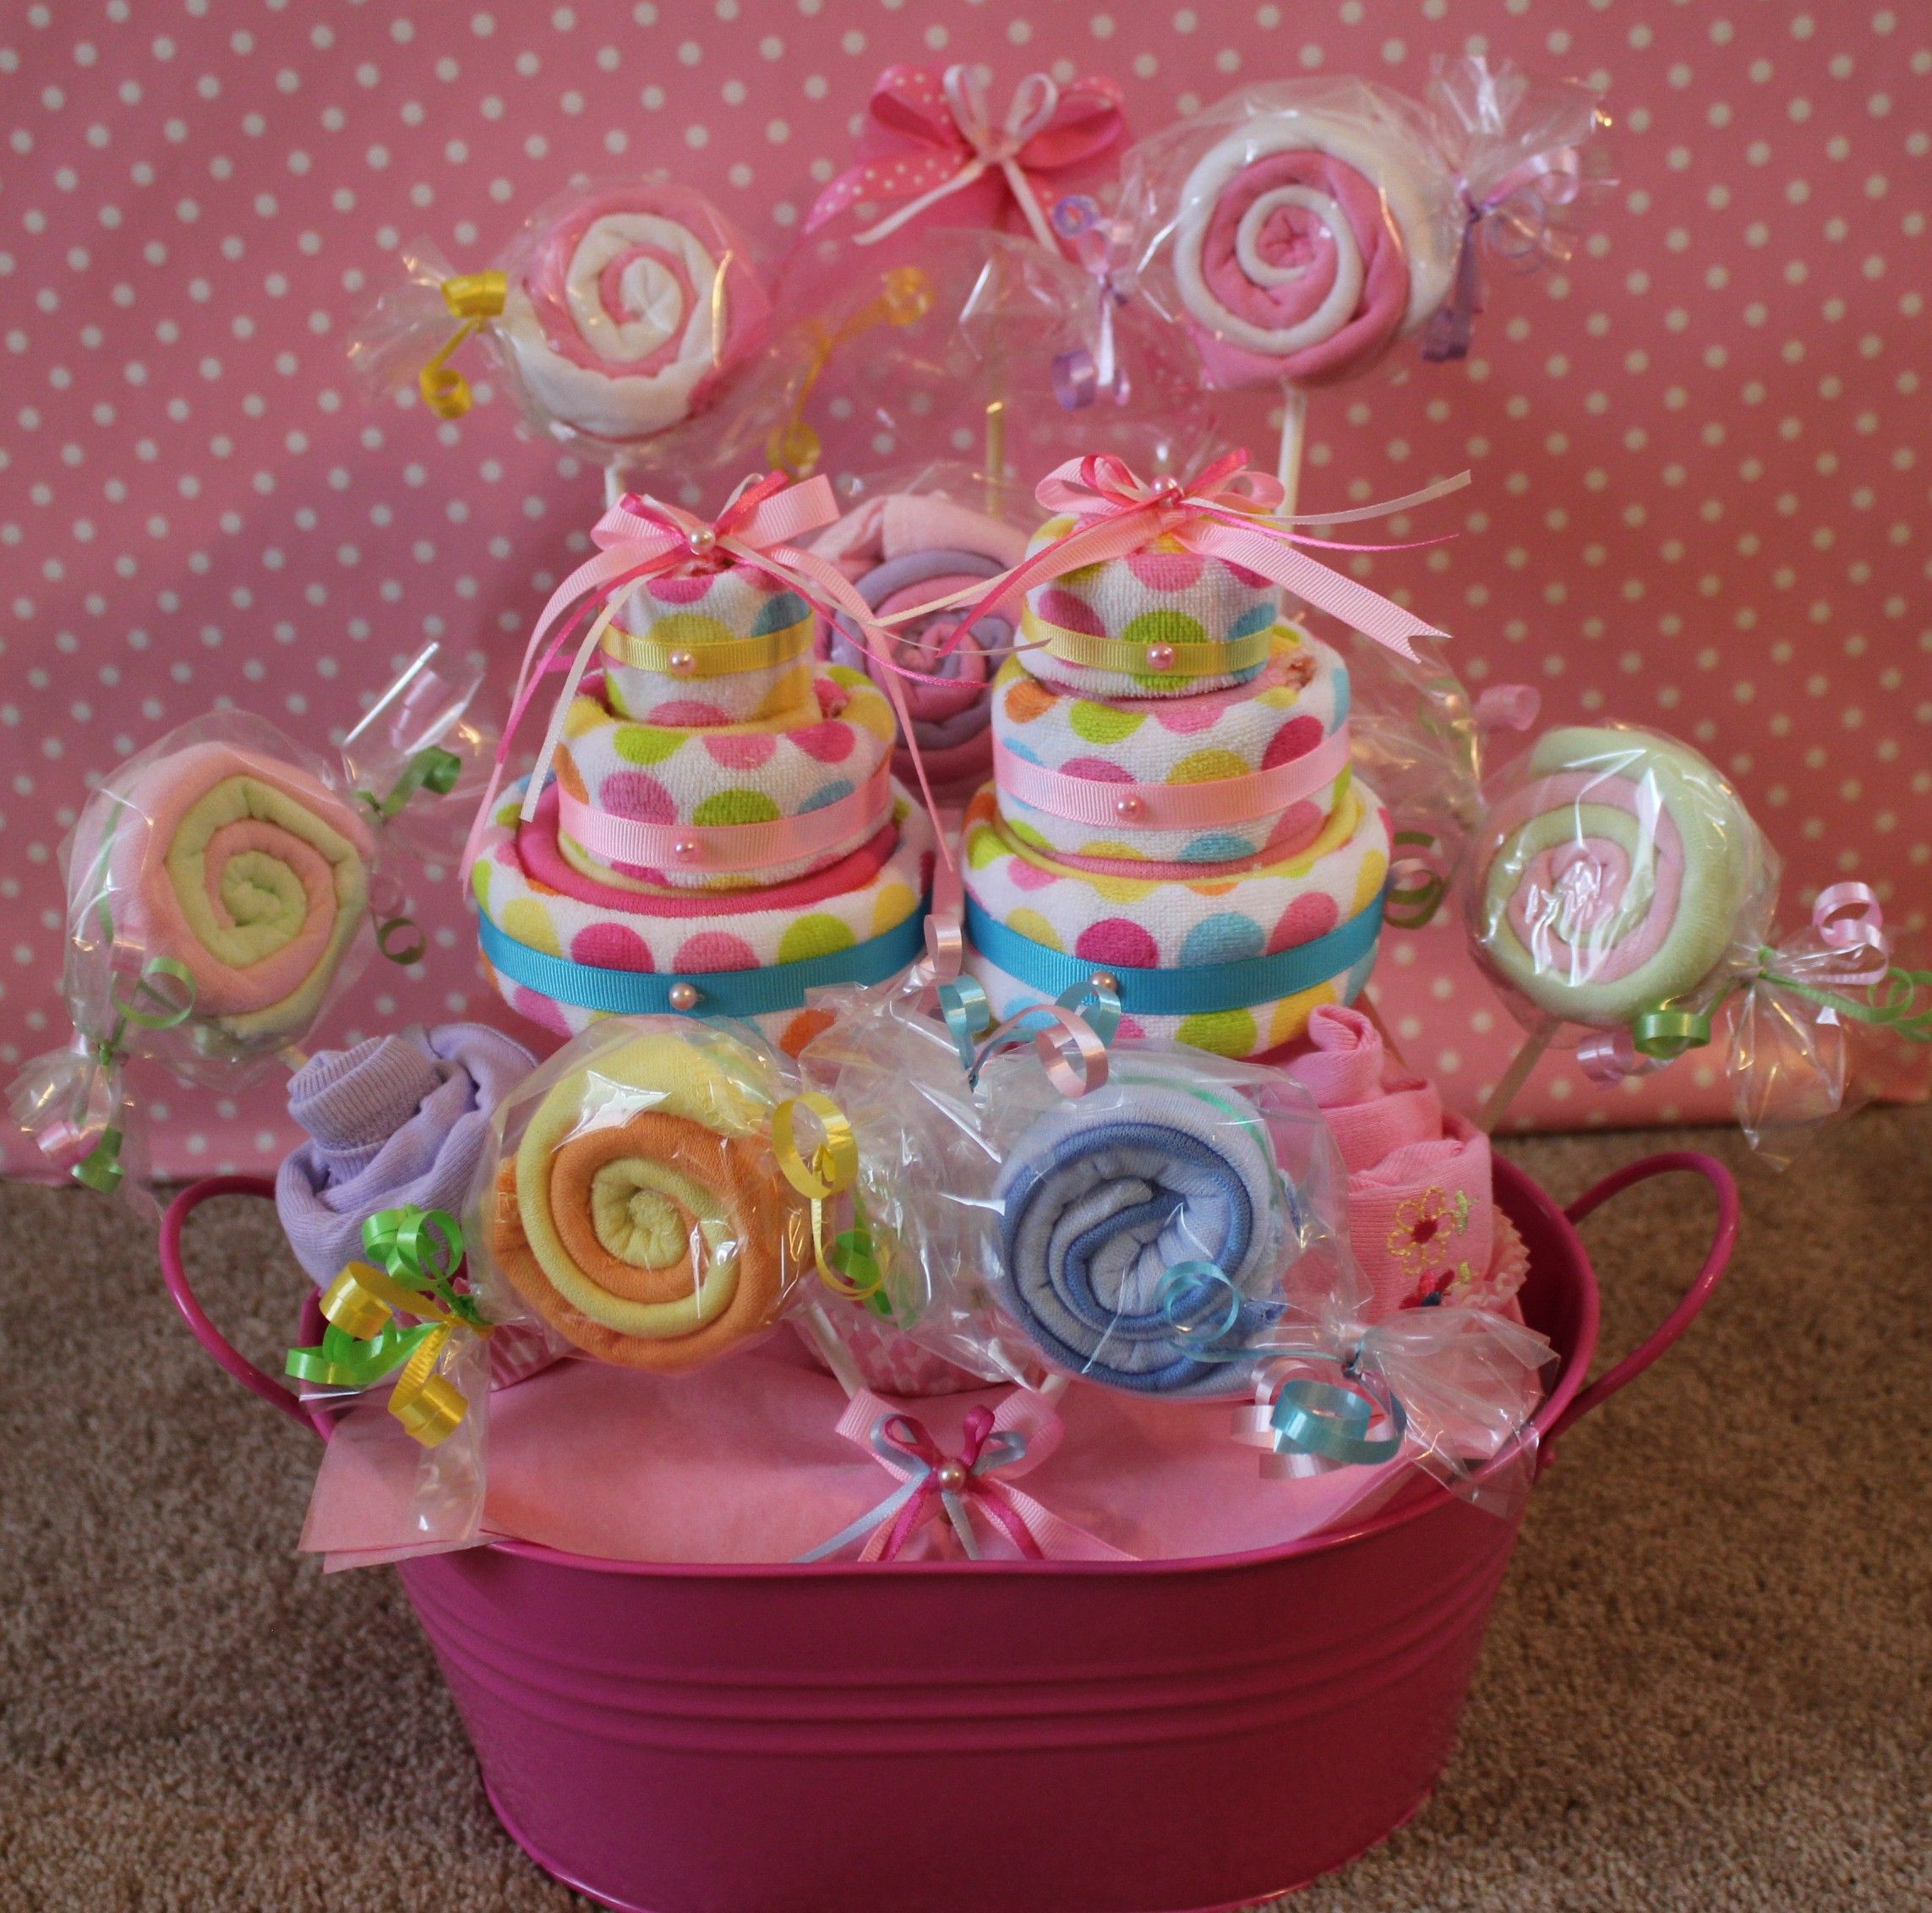 Gift Ideas For New Baby Girl
 Wash cloth centerpiece